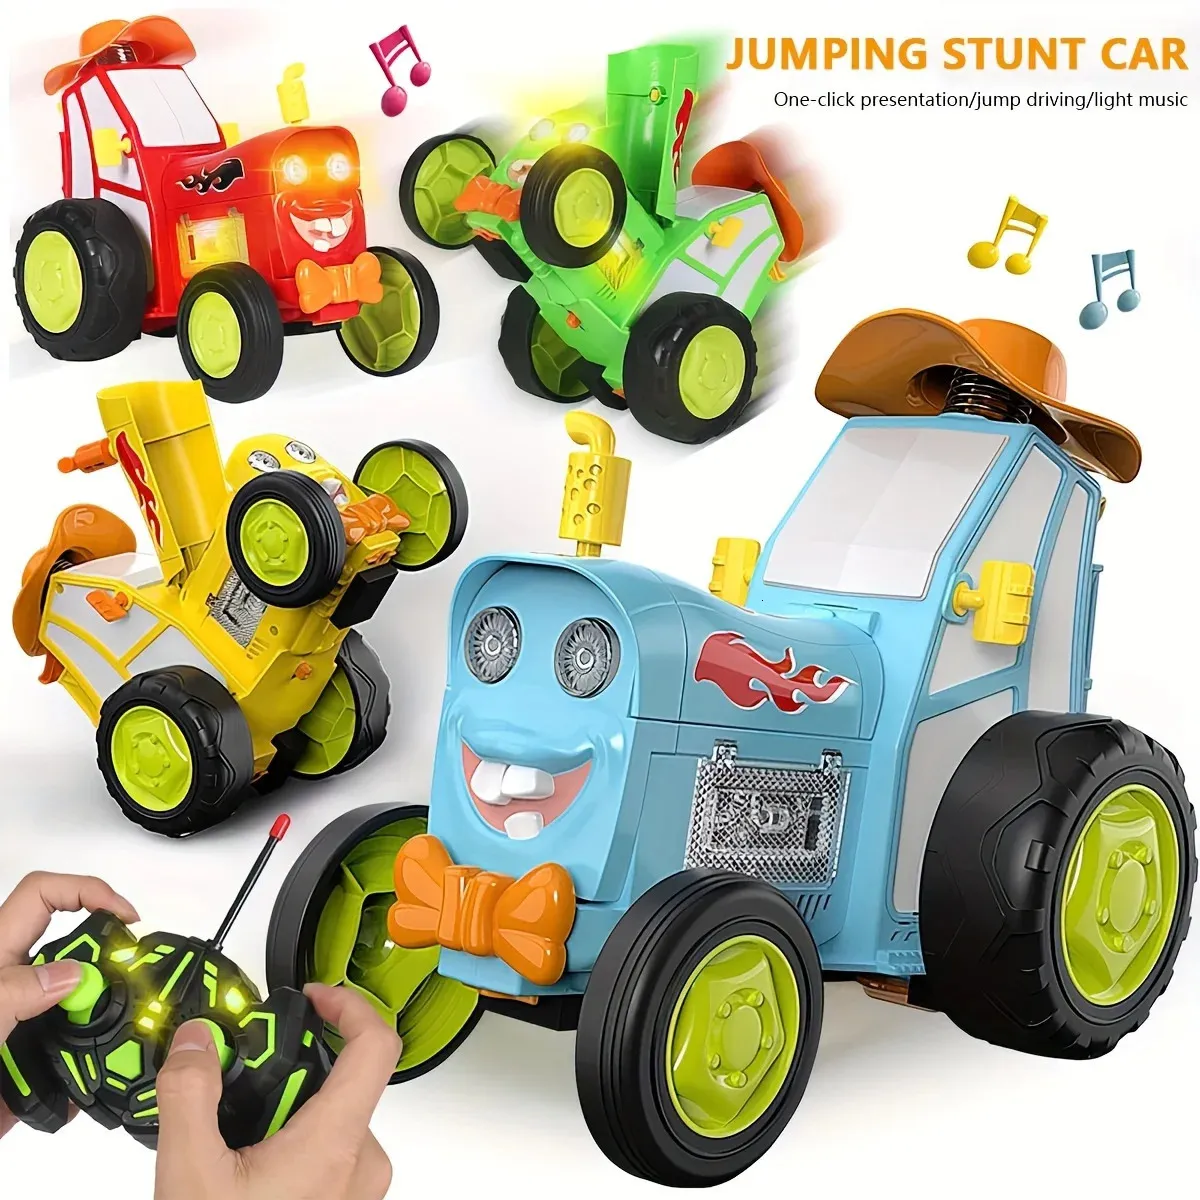 Crazy Jumping Remote Control Car Toys Wireless Swing Stunt Dancing With LED Light Music Rocking Tumbling Rechargeble 240426